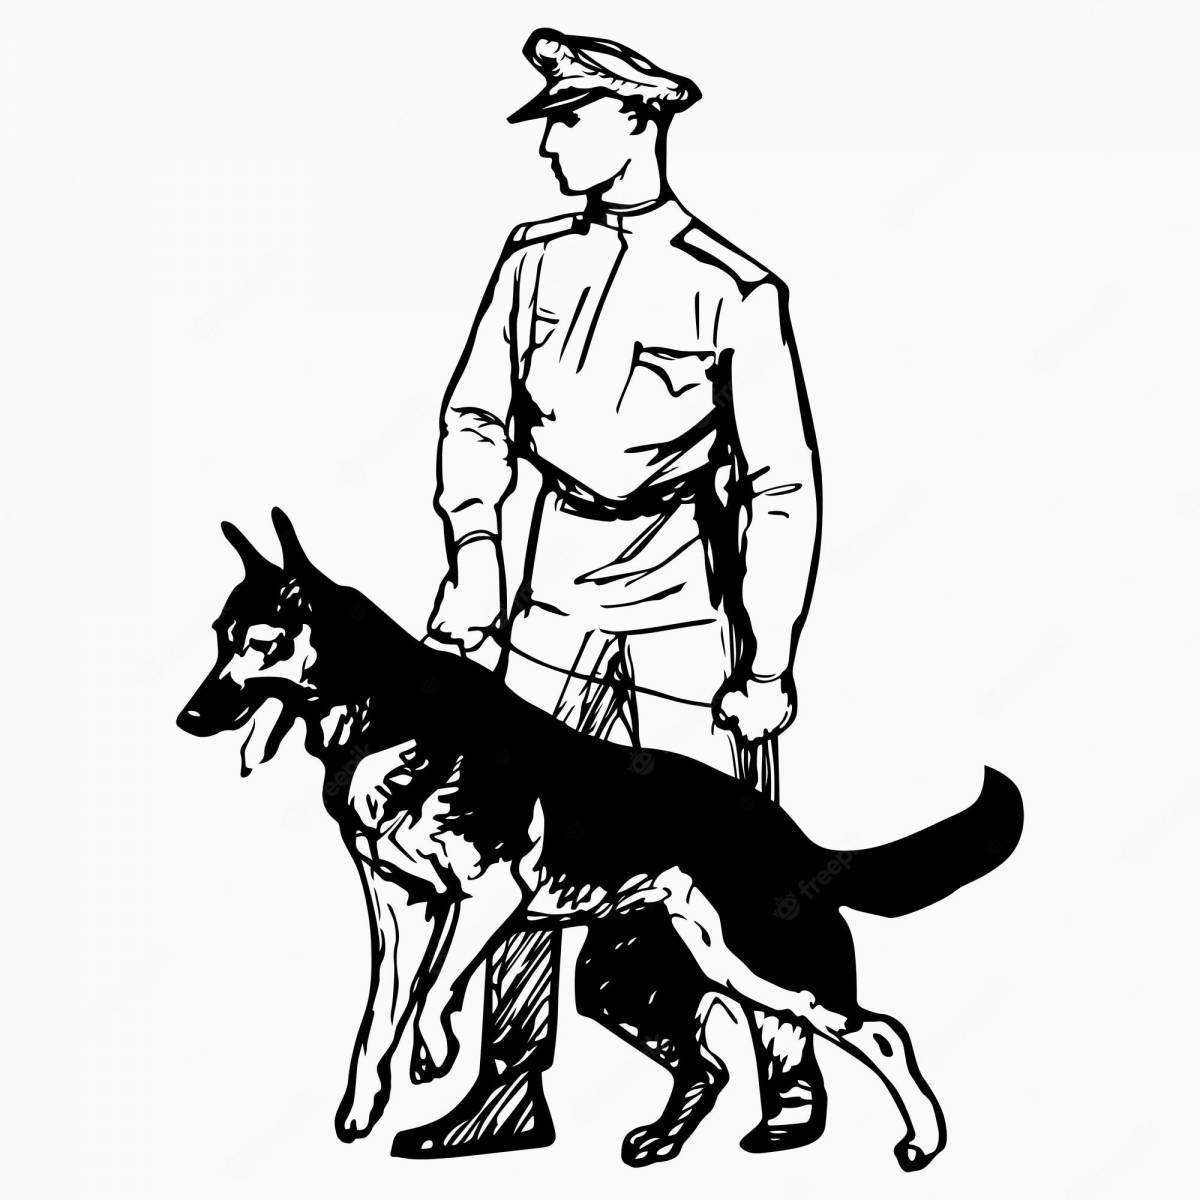 Brave border guard with a dog for children